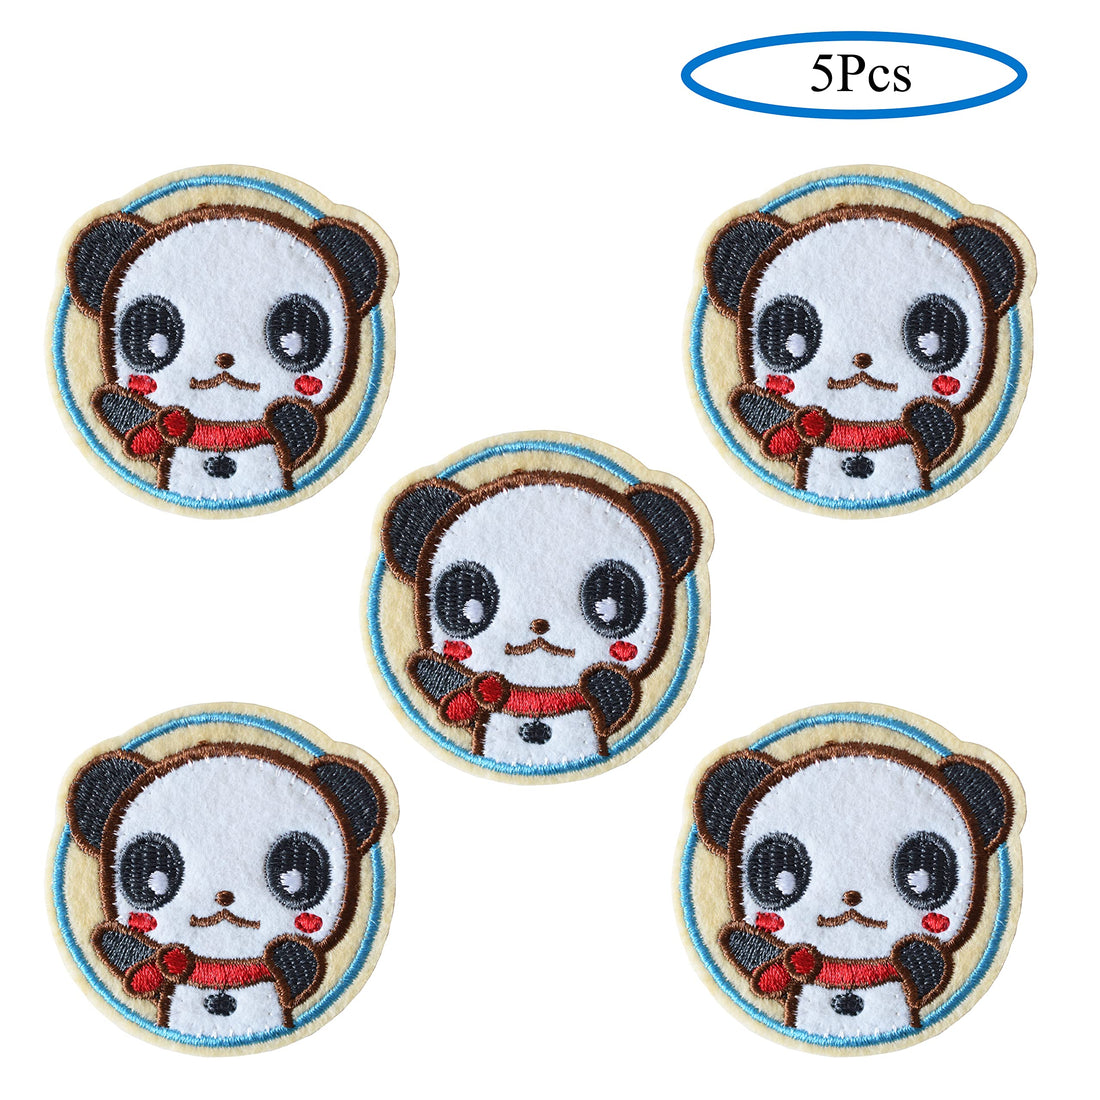 5Pcs Panda Embroidered Iron on Patch for Clothes, Iron-on Patches / Sew-on Appliques Patches for Clothing, Jackets, Backpacks, Caps, Jeans